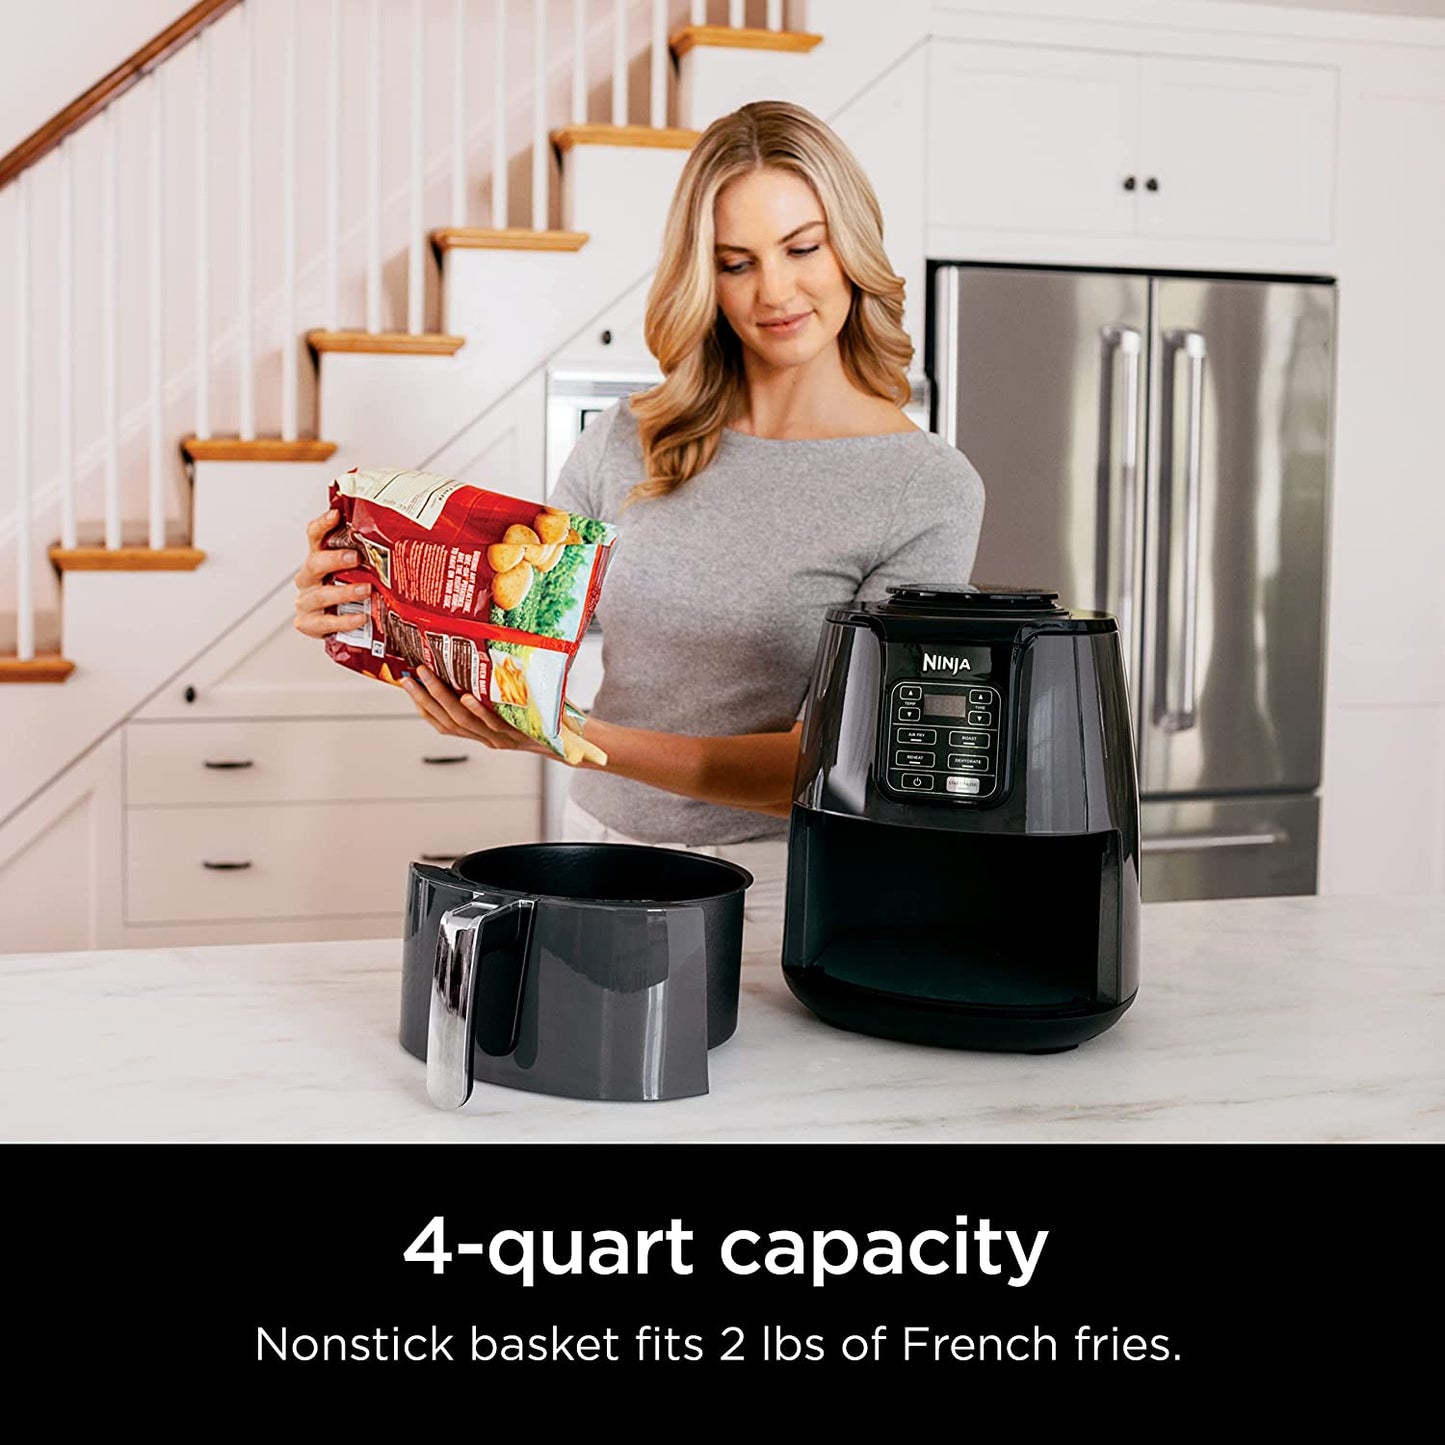 AF101 Air Fryer That Crisps, Roasts, Reheats, & Dehydrates, for Quick, Easy Meals, 4 Quart Capacity, & High Gloss Finish, Black/Grey